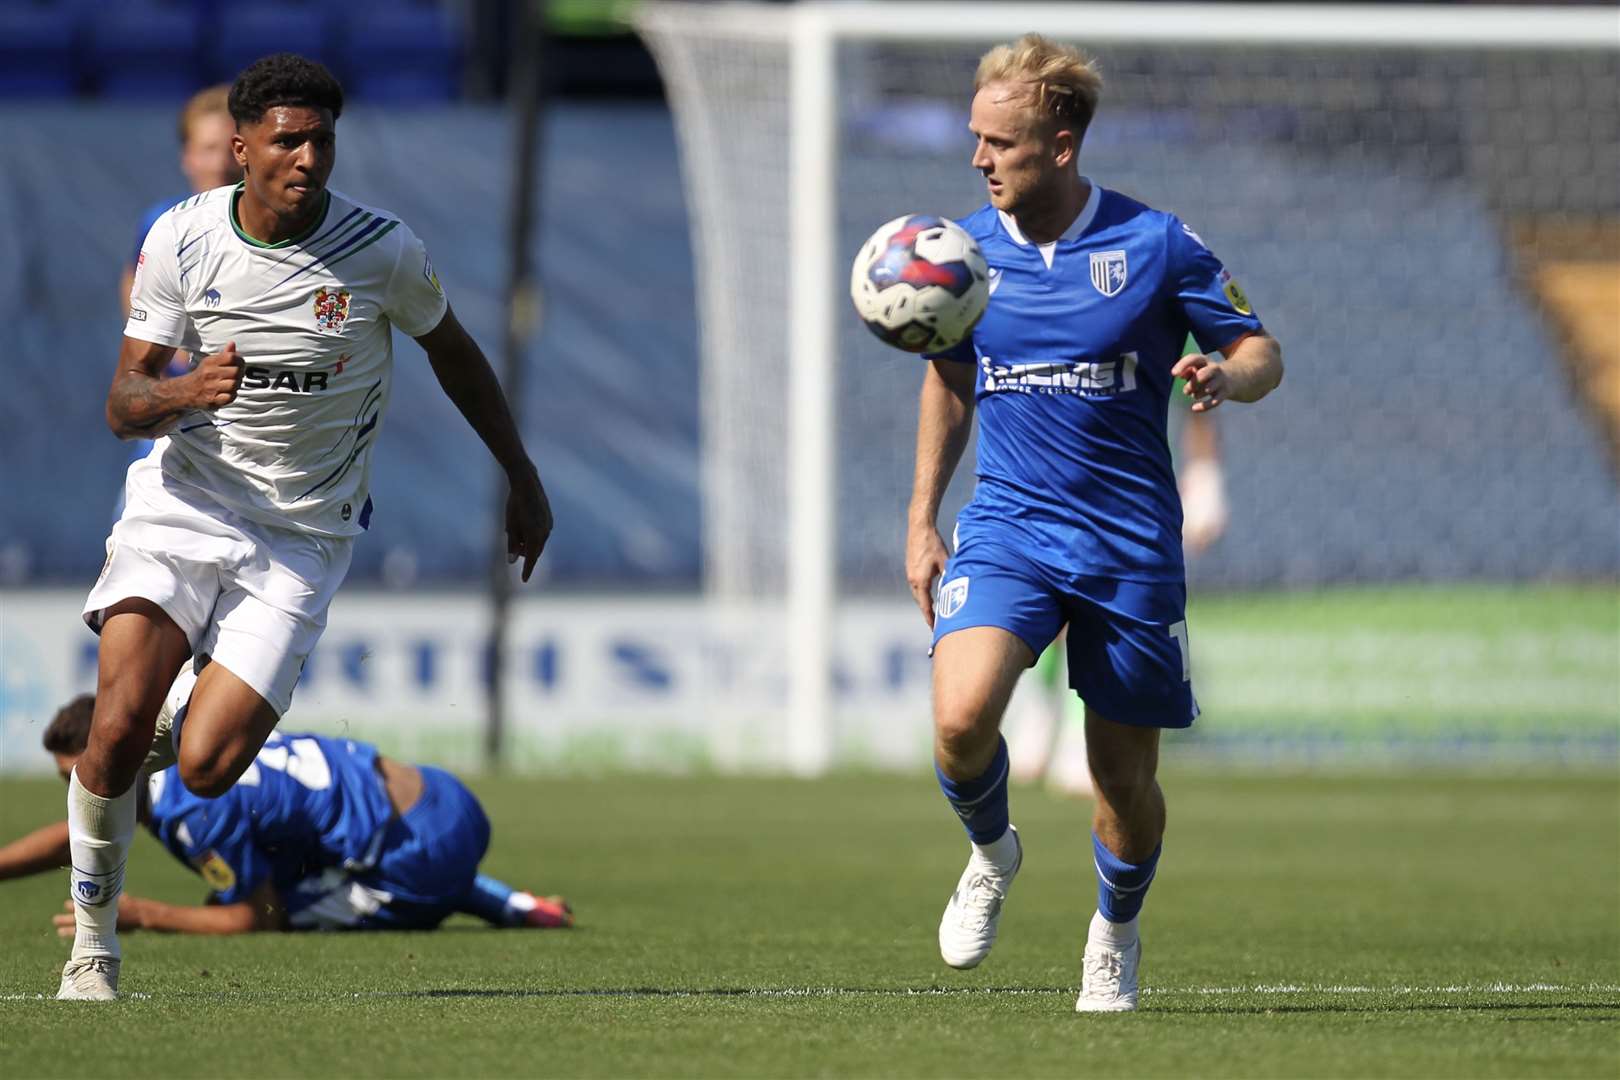 Gillingham's Ben Reeves on the ball against Tranmere on Saturday. Picture: KPI